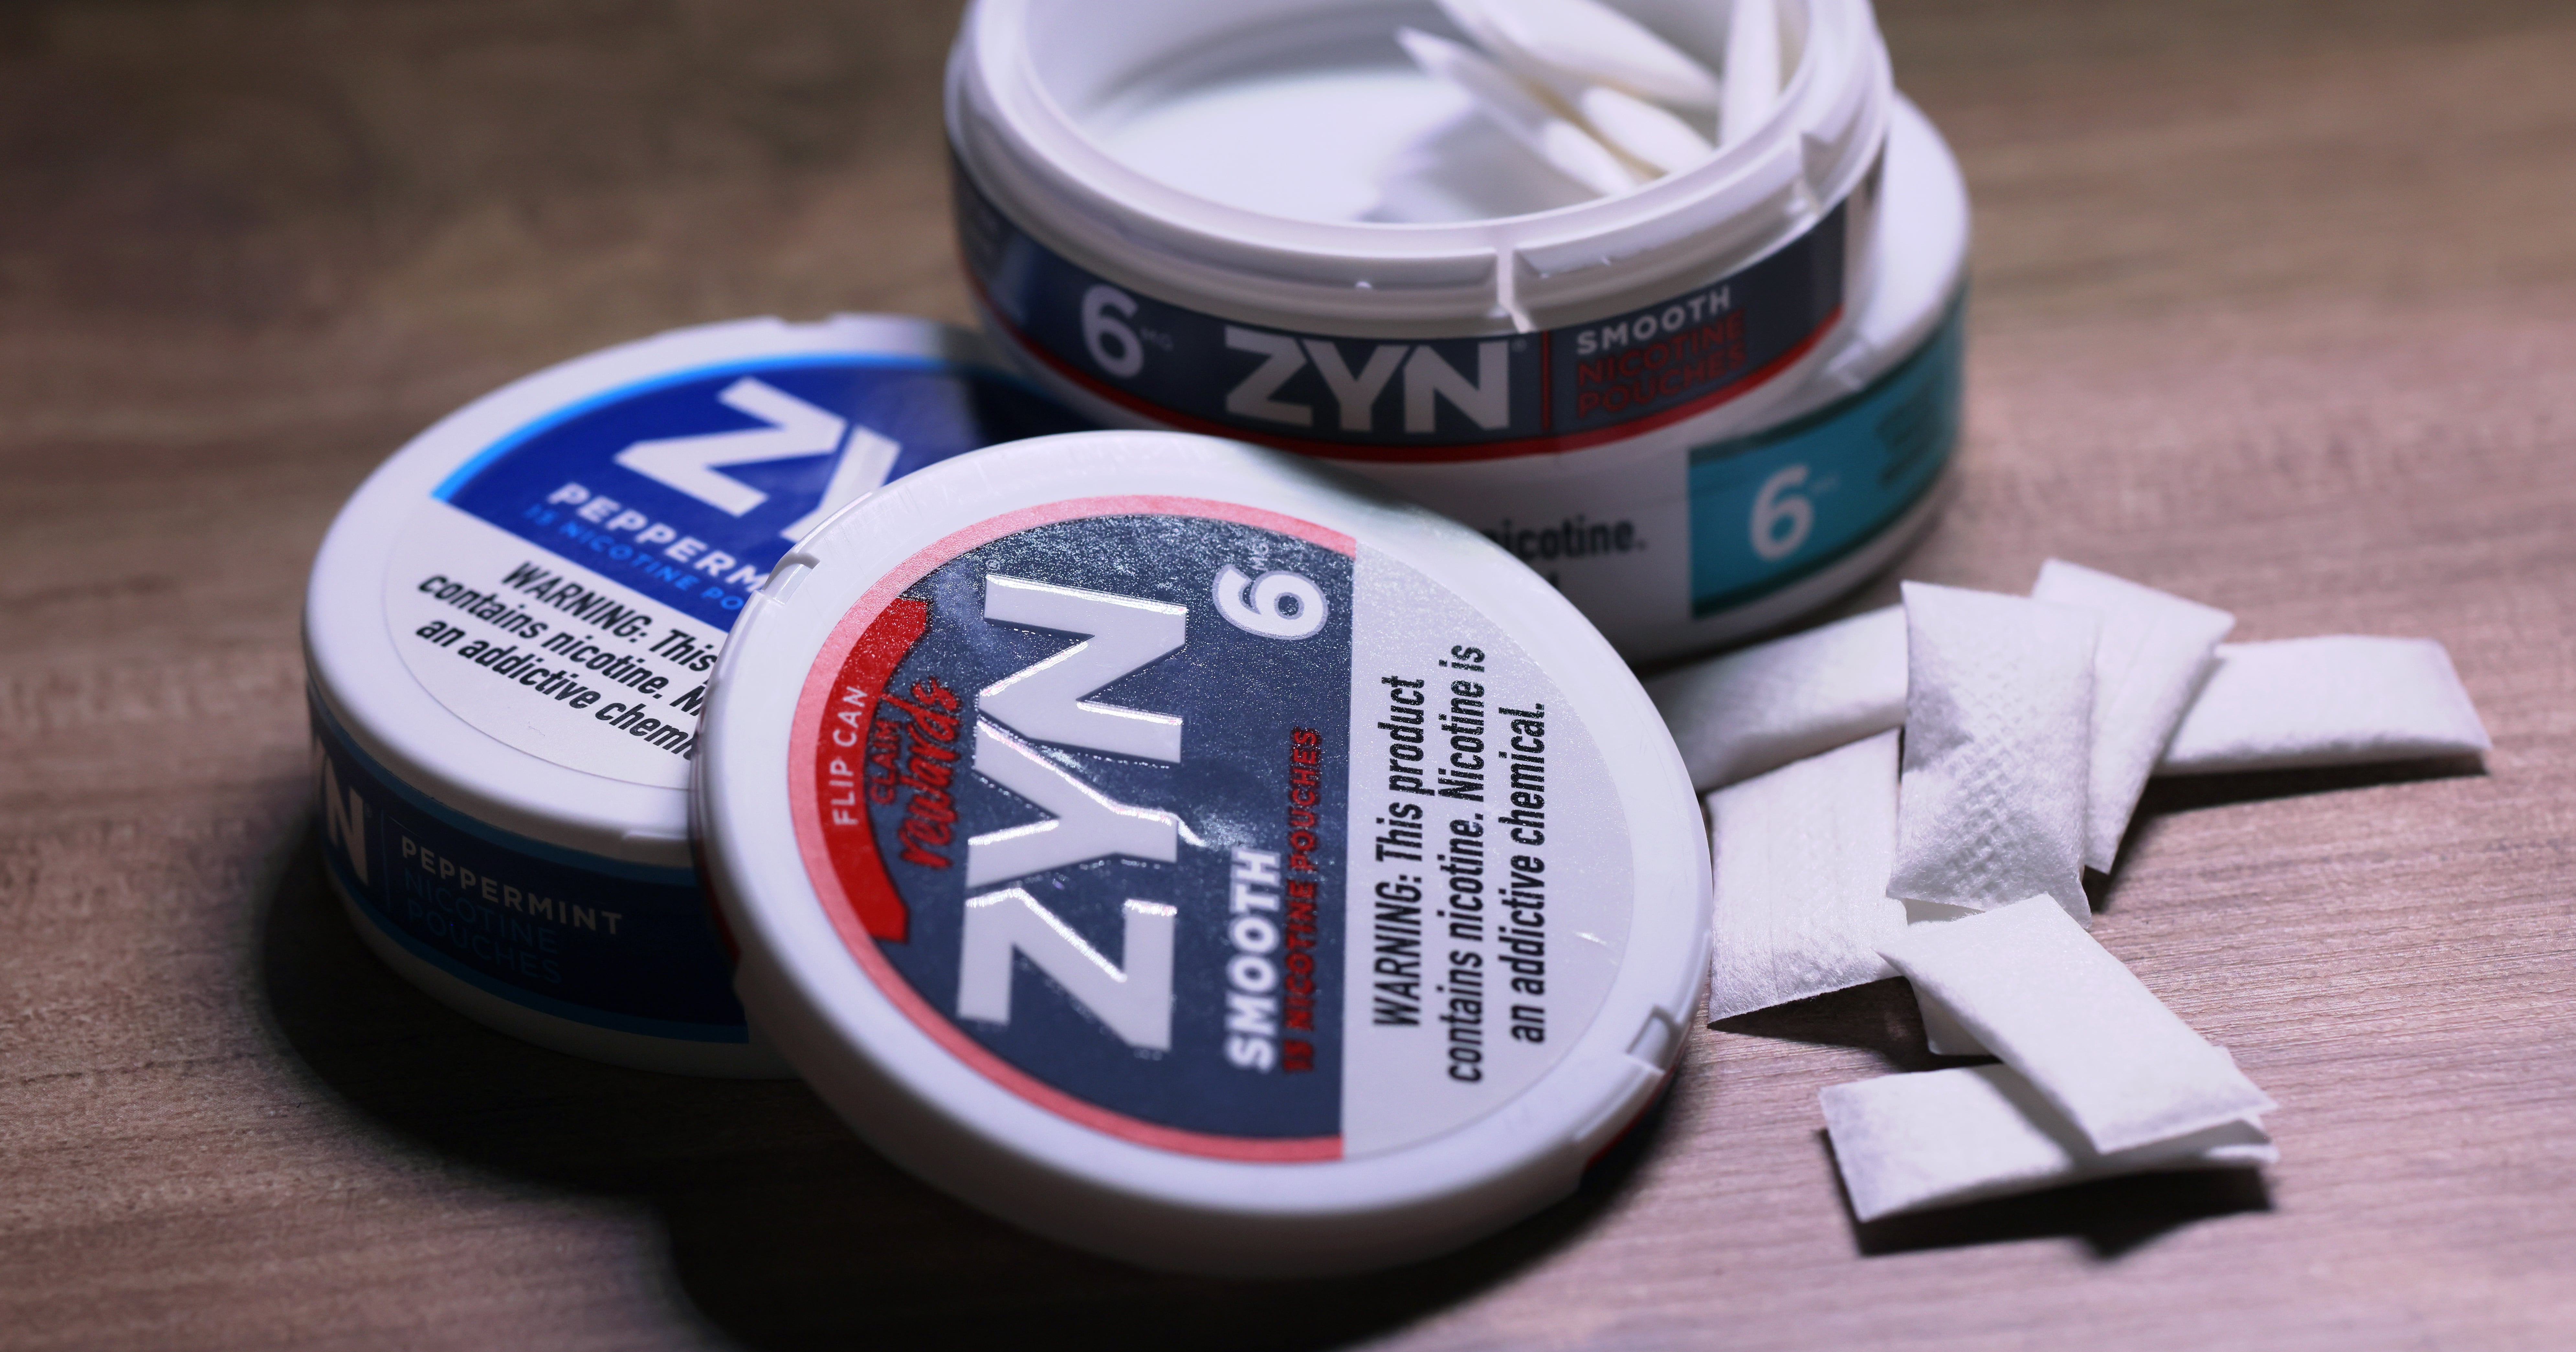 Is Zyn Bad For You? Here’s Where Doctors Stand on the Viral Nicotine Pouches